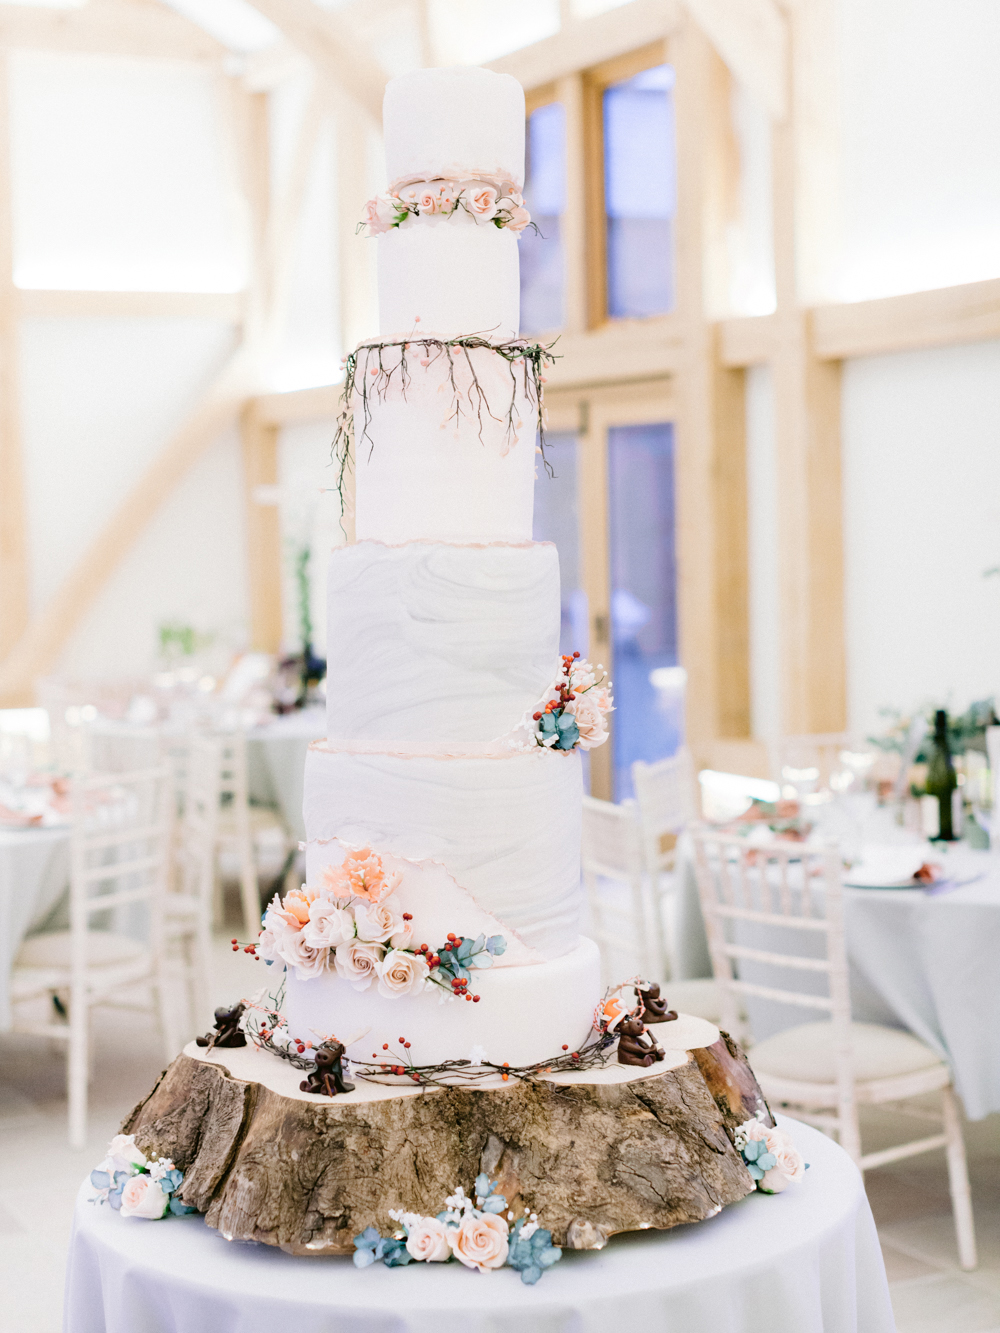 Romantic 5 tiered homemade white wedding cake with Moose animal decorations